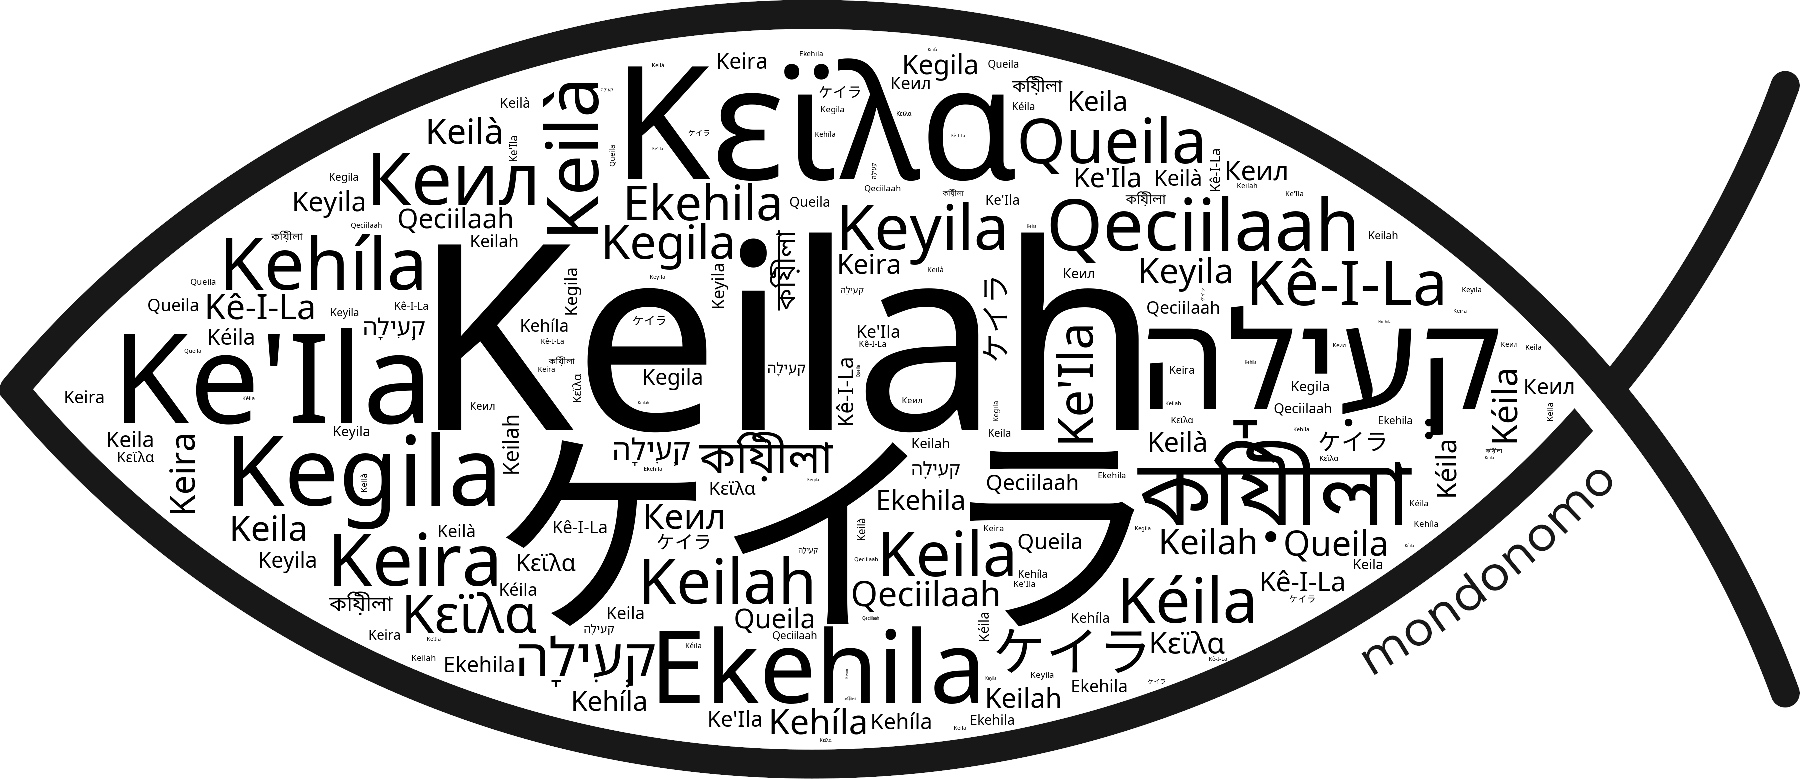 Name Keilah in the world's Bibles